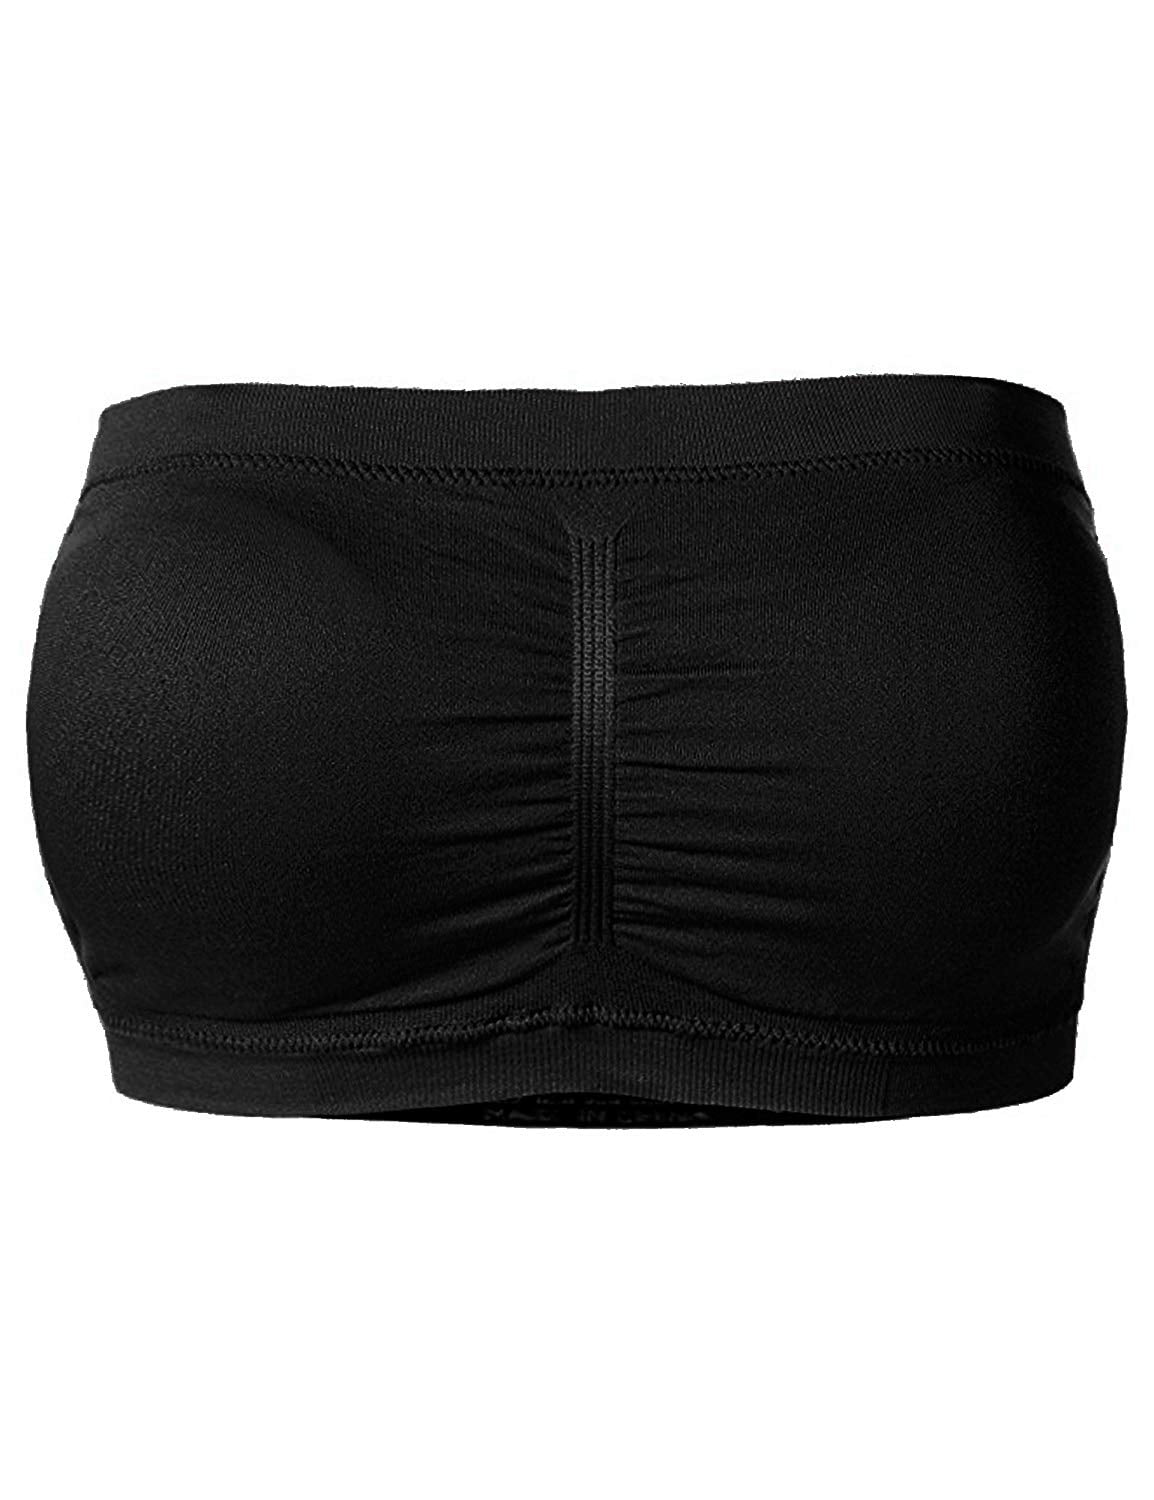 Ladies Basic 7 Seamless Padded Tube Top Sports & Fitness Bra Bandeau  (Black, One Size Fits All(S-L)) 